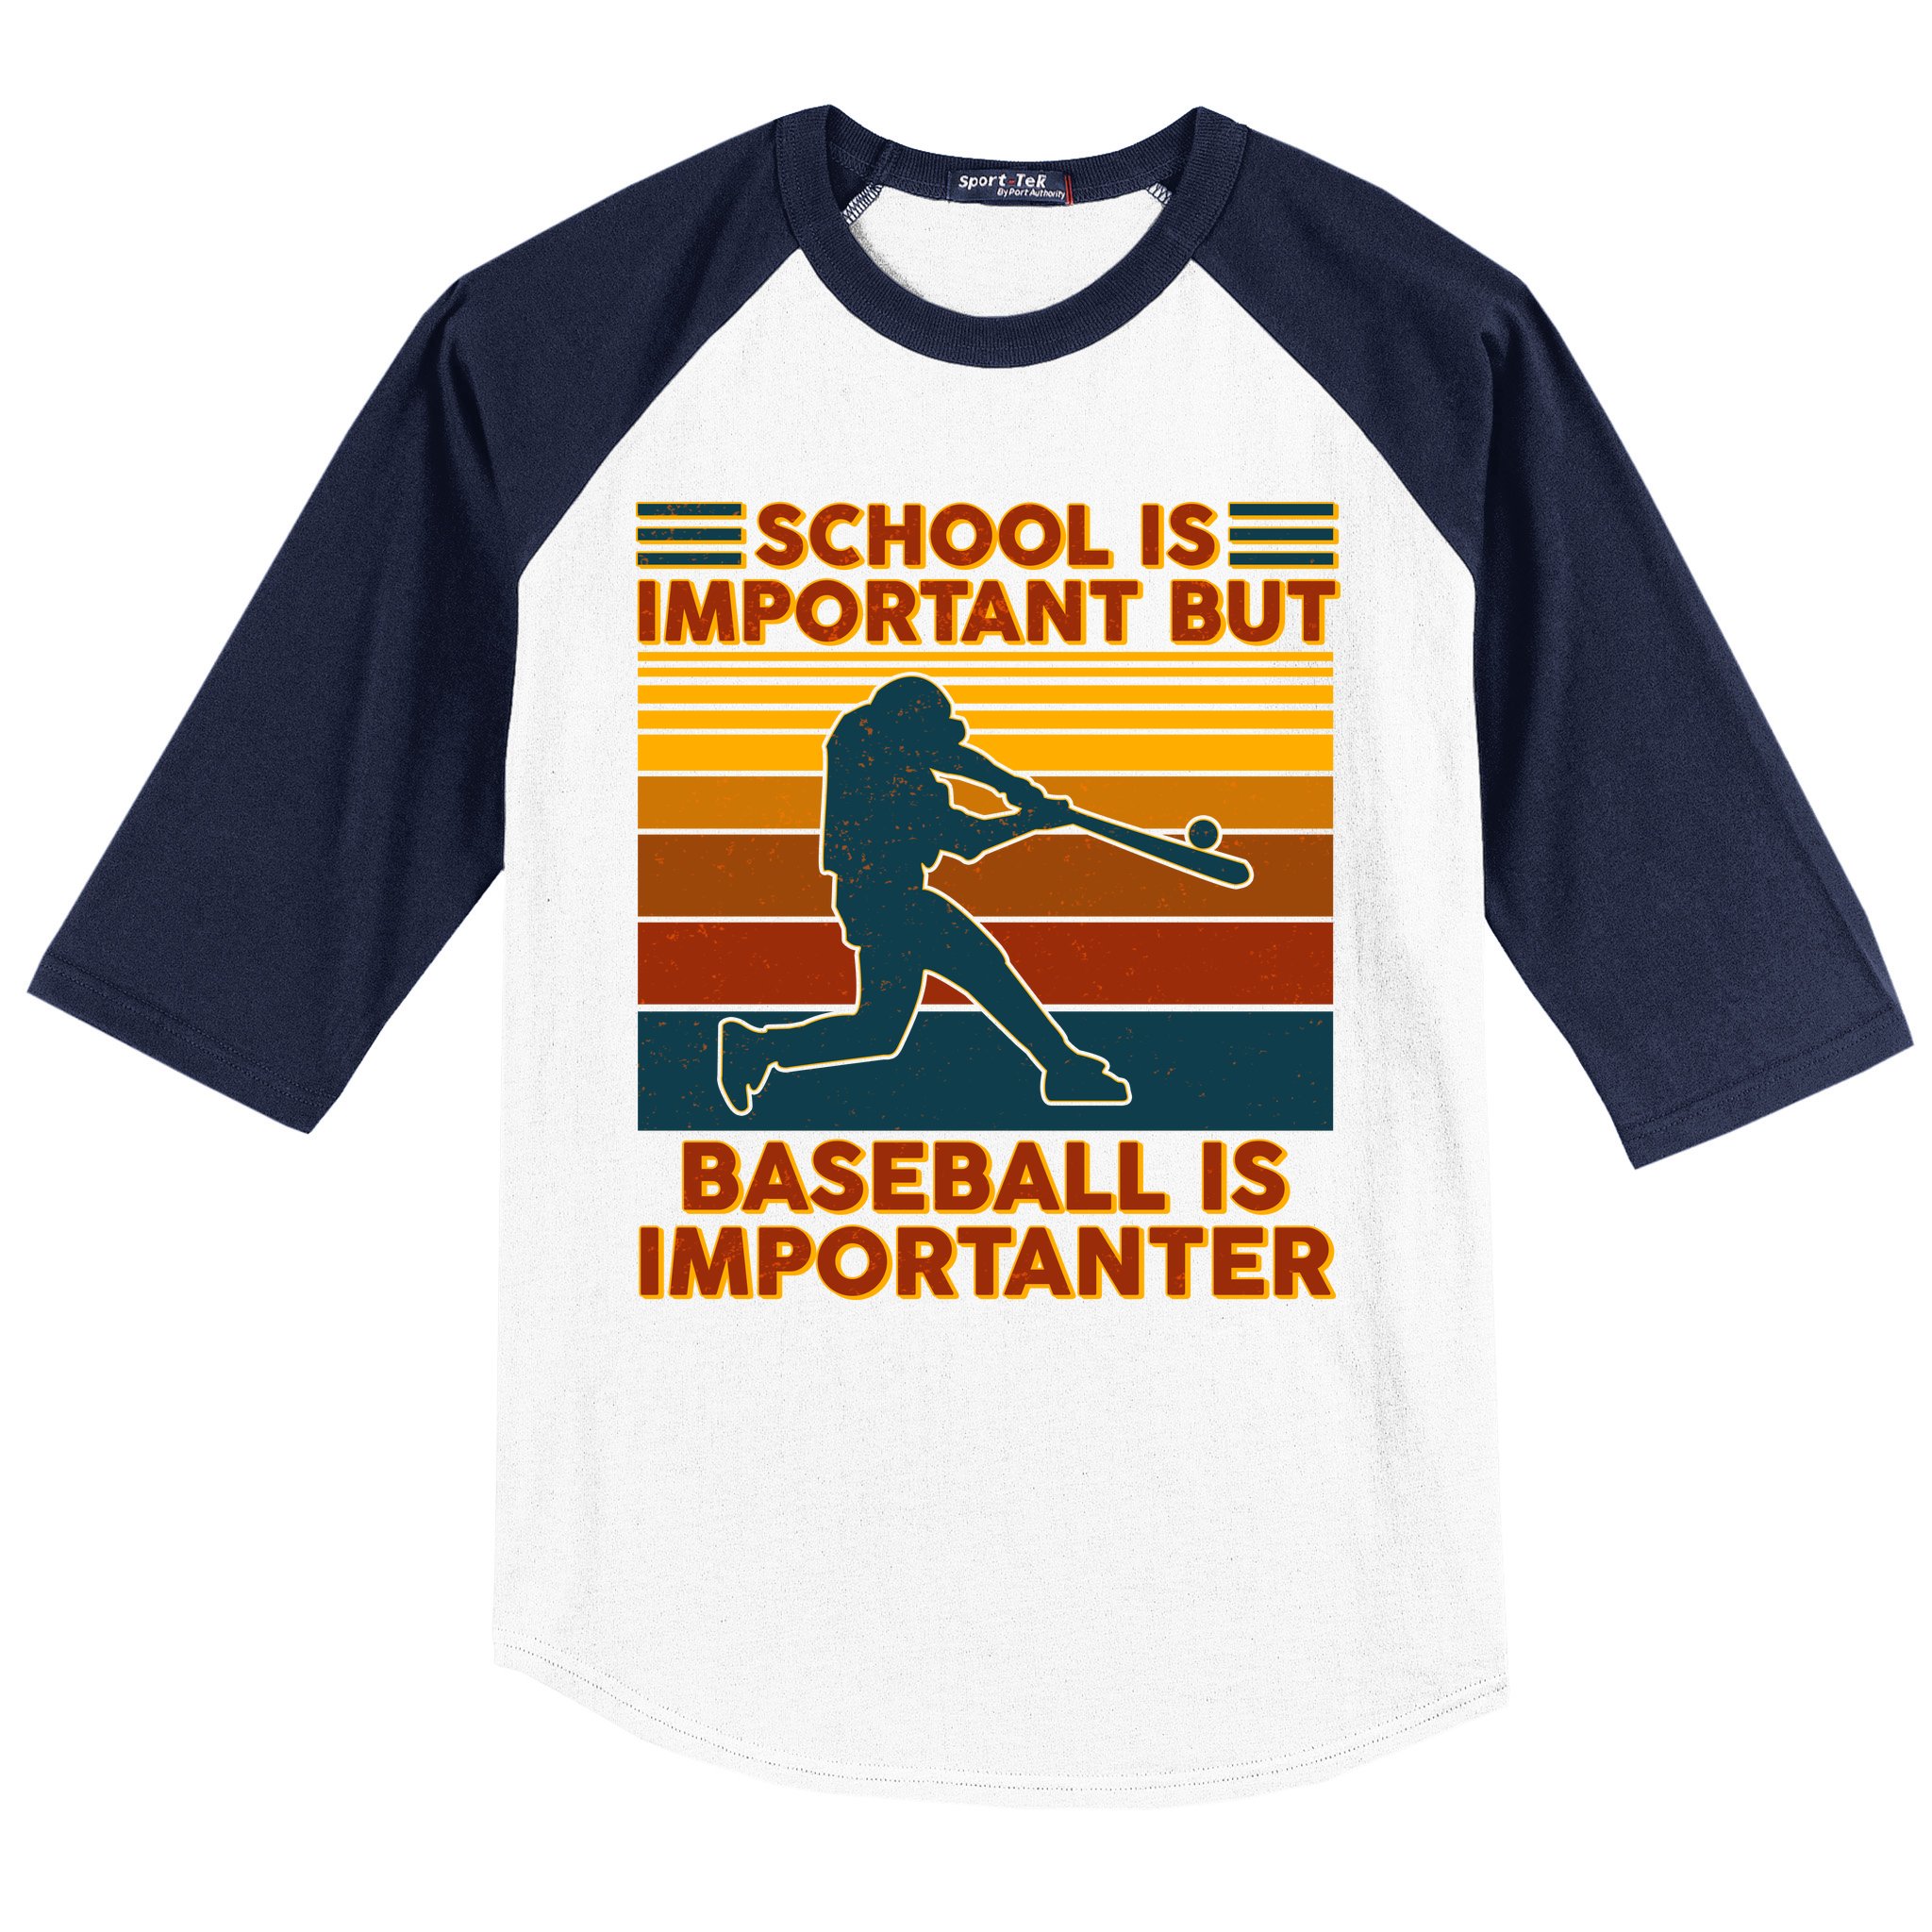 Funny Baseball Shirt - School Is Important But Baseball Is Importanter Back  To School T-Shirt by Really Awesome Shirts